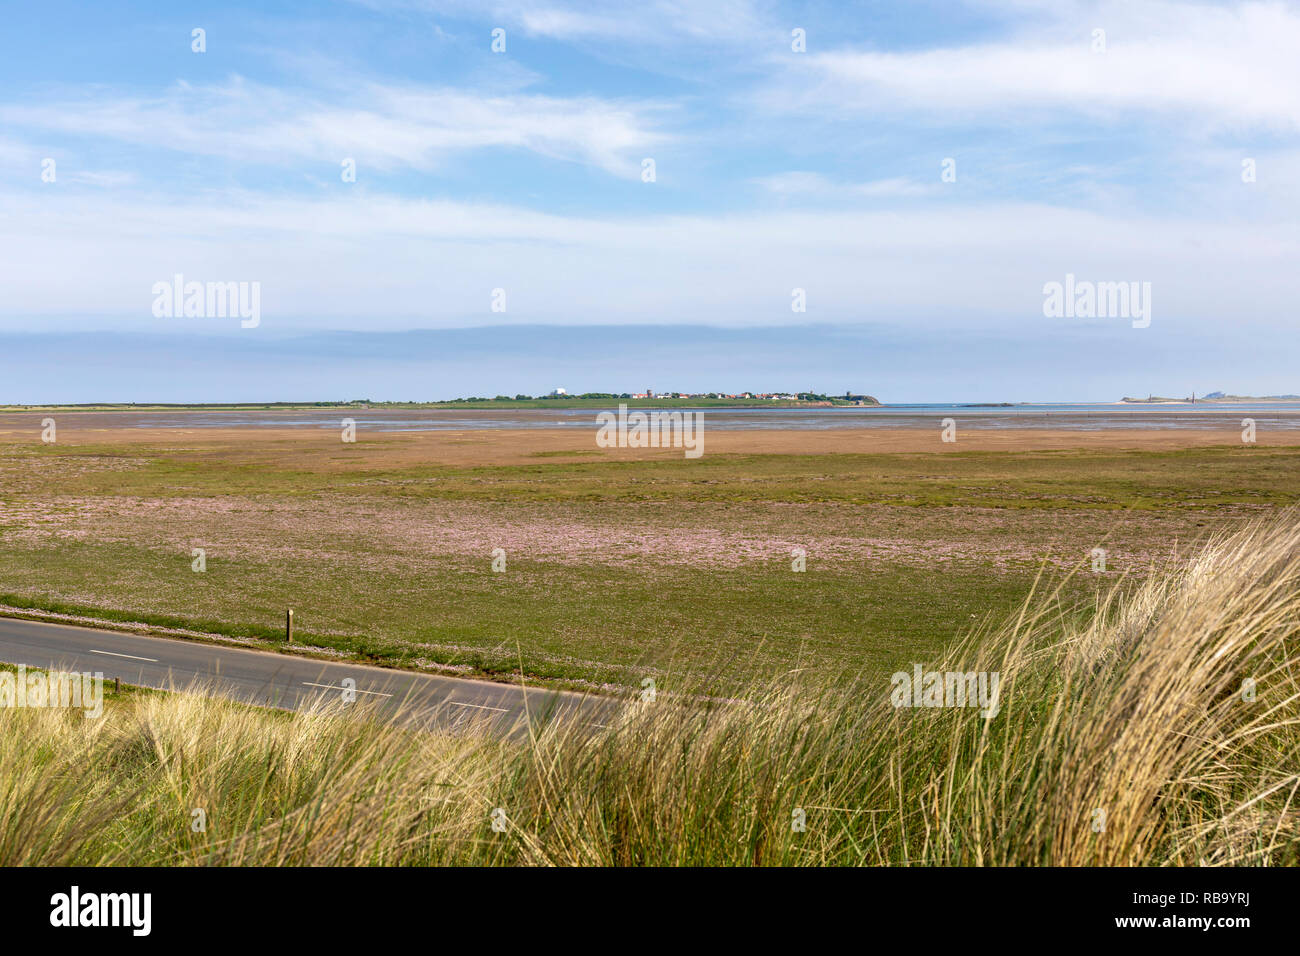 The Holy Island of Lindisfarne viewed from the tidal causeway road across the mud flats Stock Photo